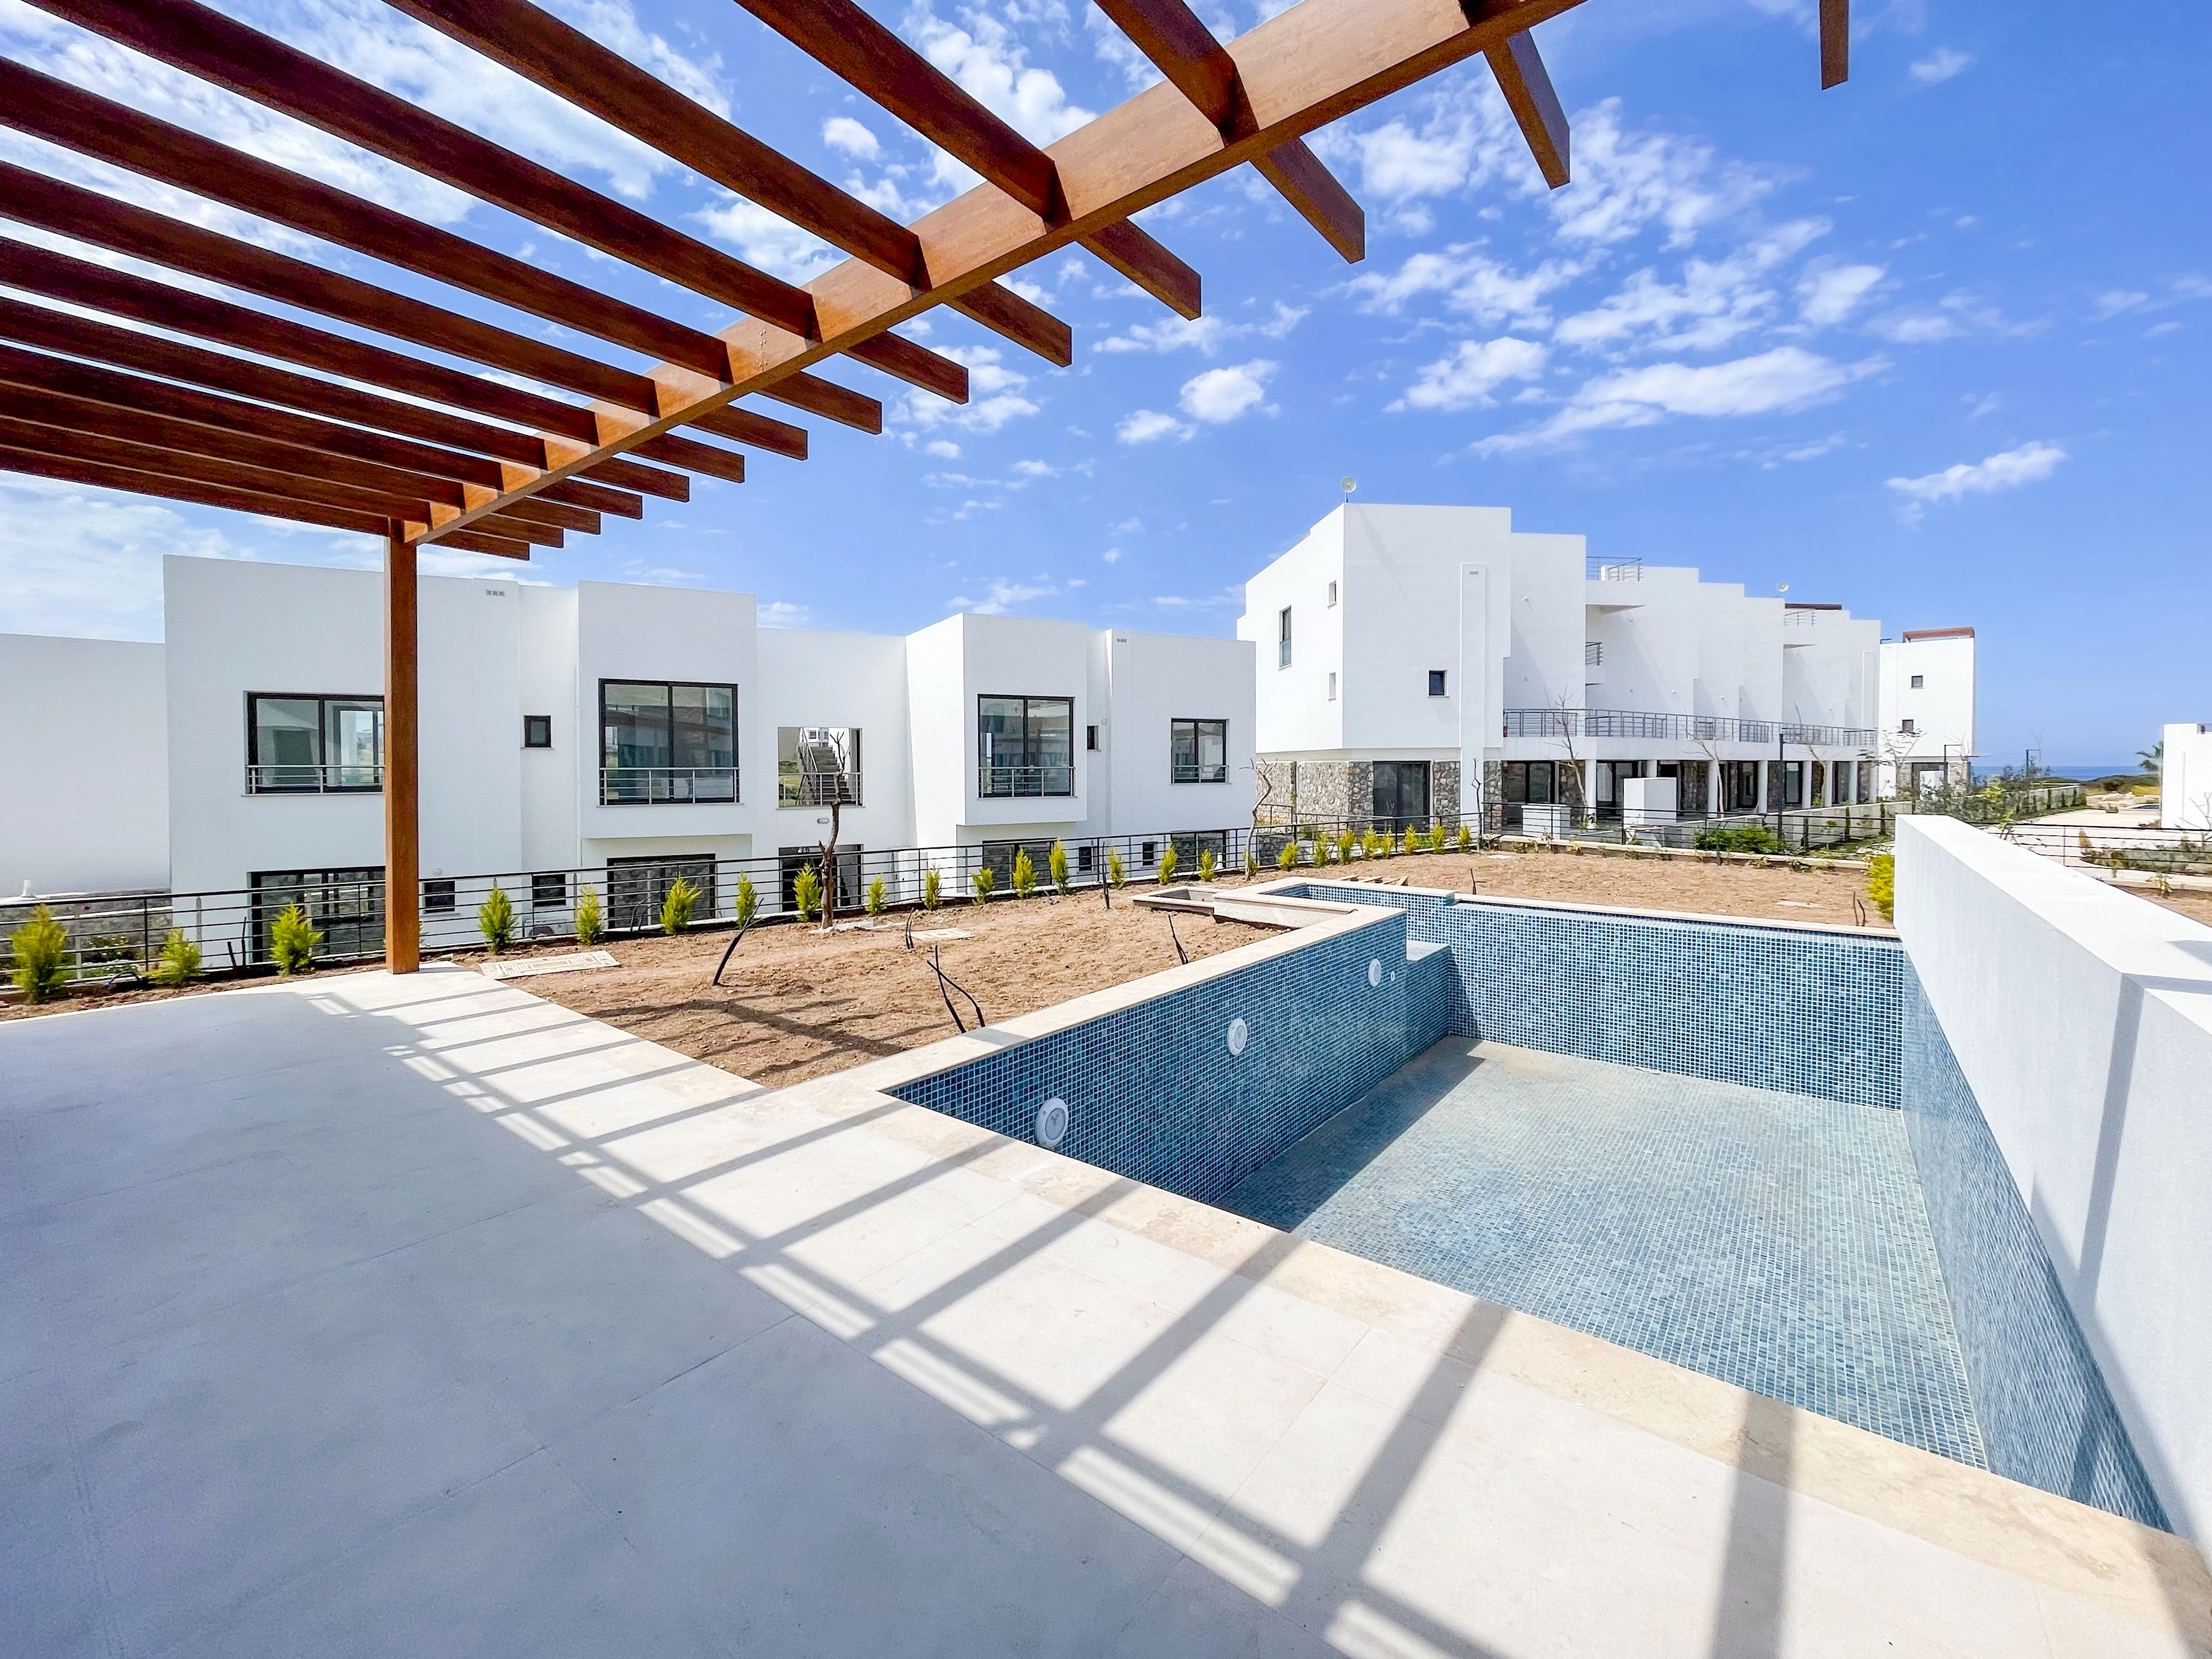 Premium 3+1 apartment in Mykonos Homes with private garden and swimming pool